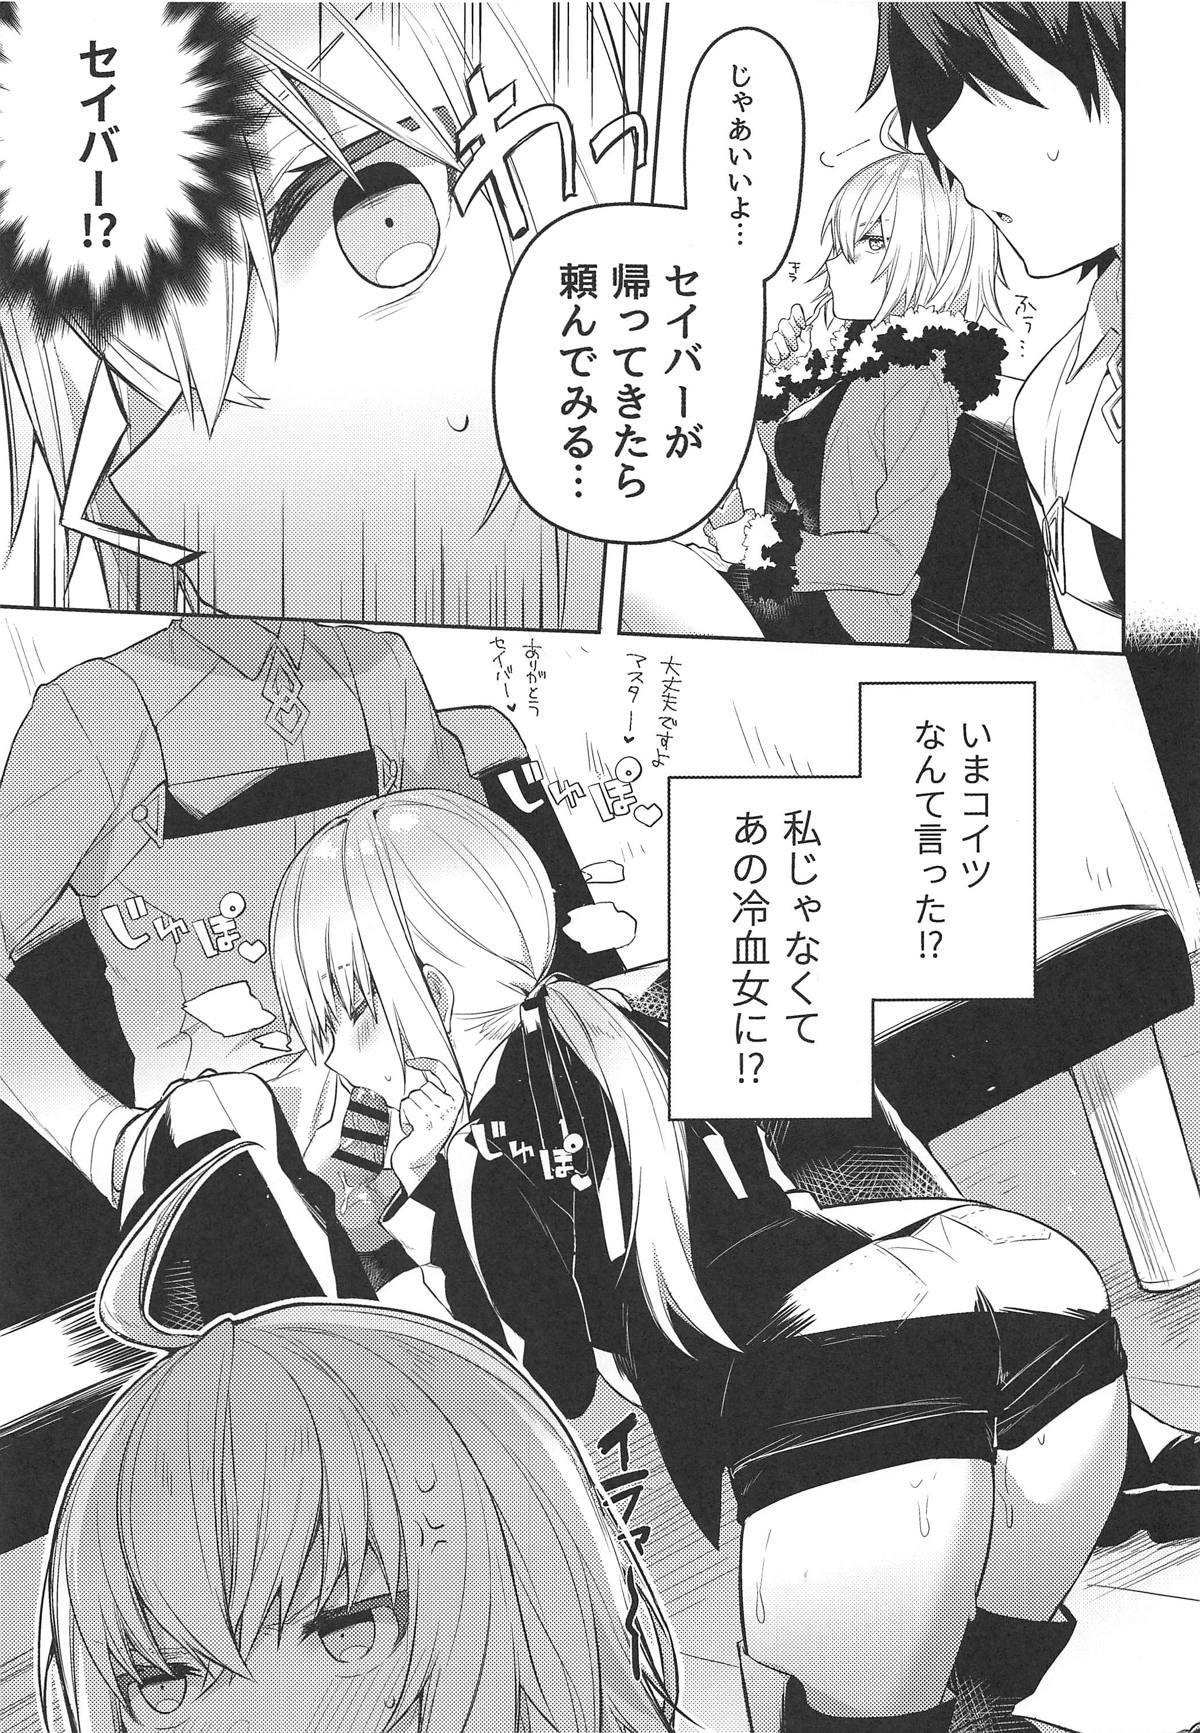 Pinoy Shinjuku Sneaking Mission - Fate grand order Weird - Page 4